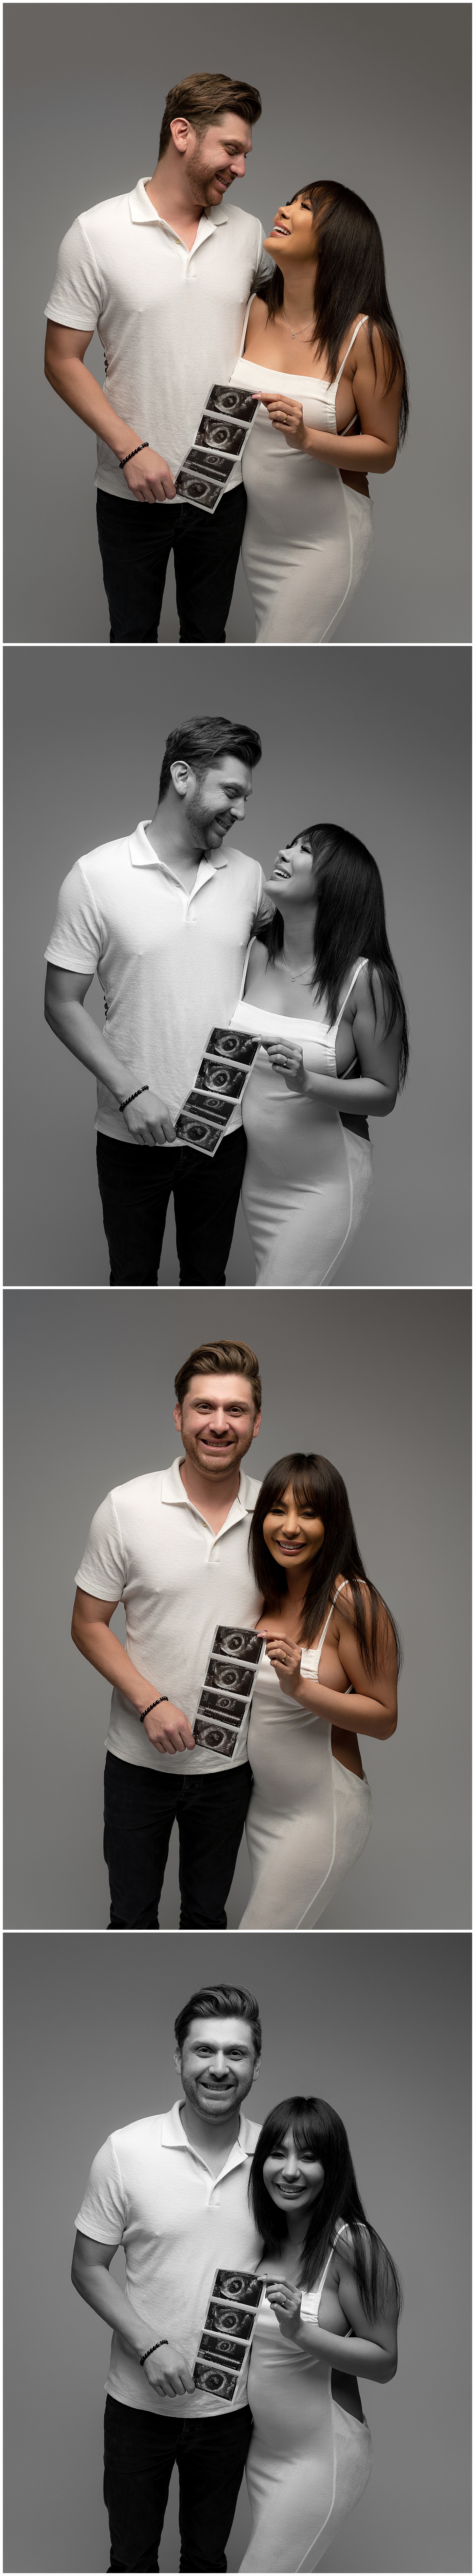 Photo reel of four pregnancy announcement photos featuring a woman in a white dress and her partner holding ultrasound photos